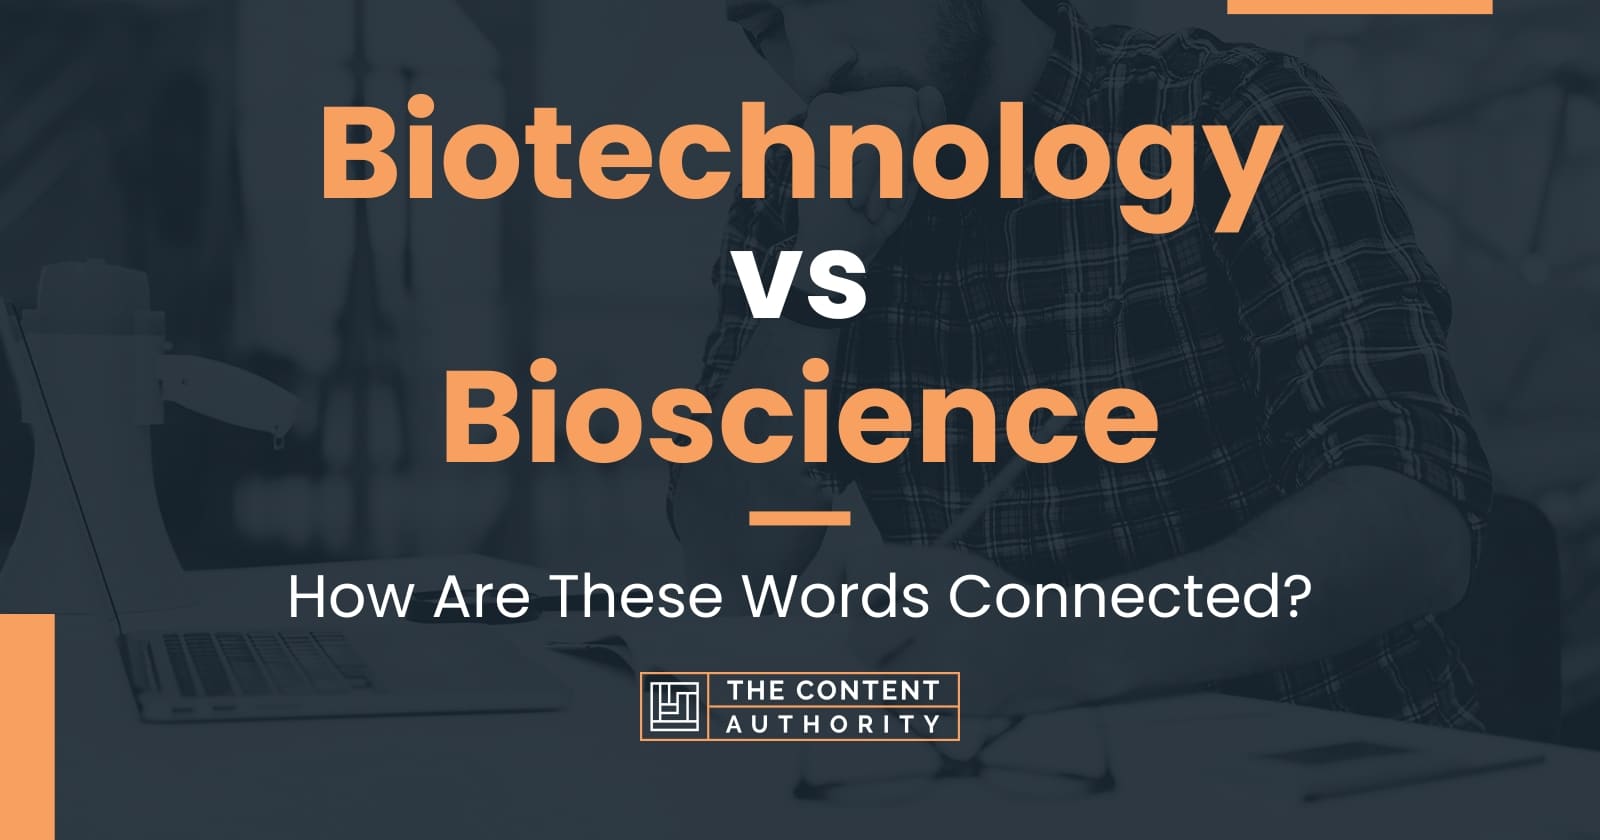 Biotechnology vs Bioscience How Are These Words Connected?